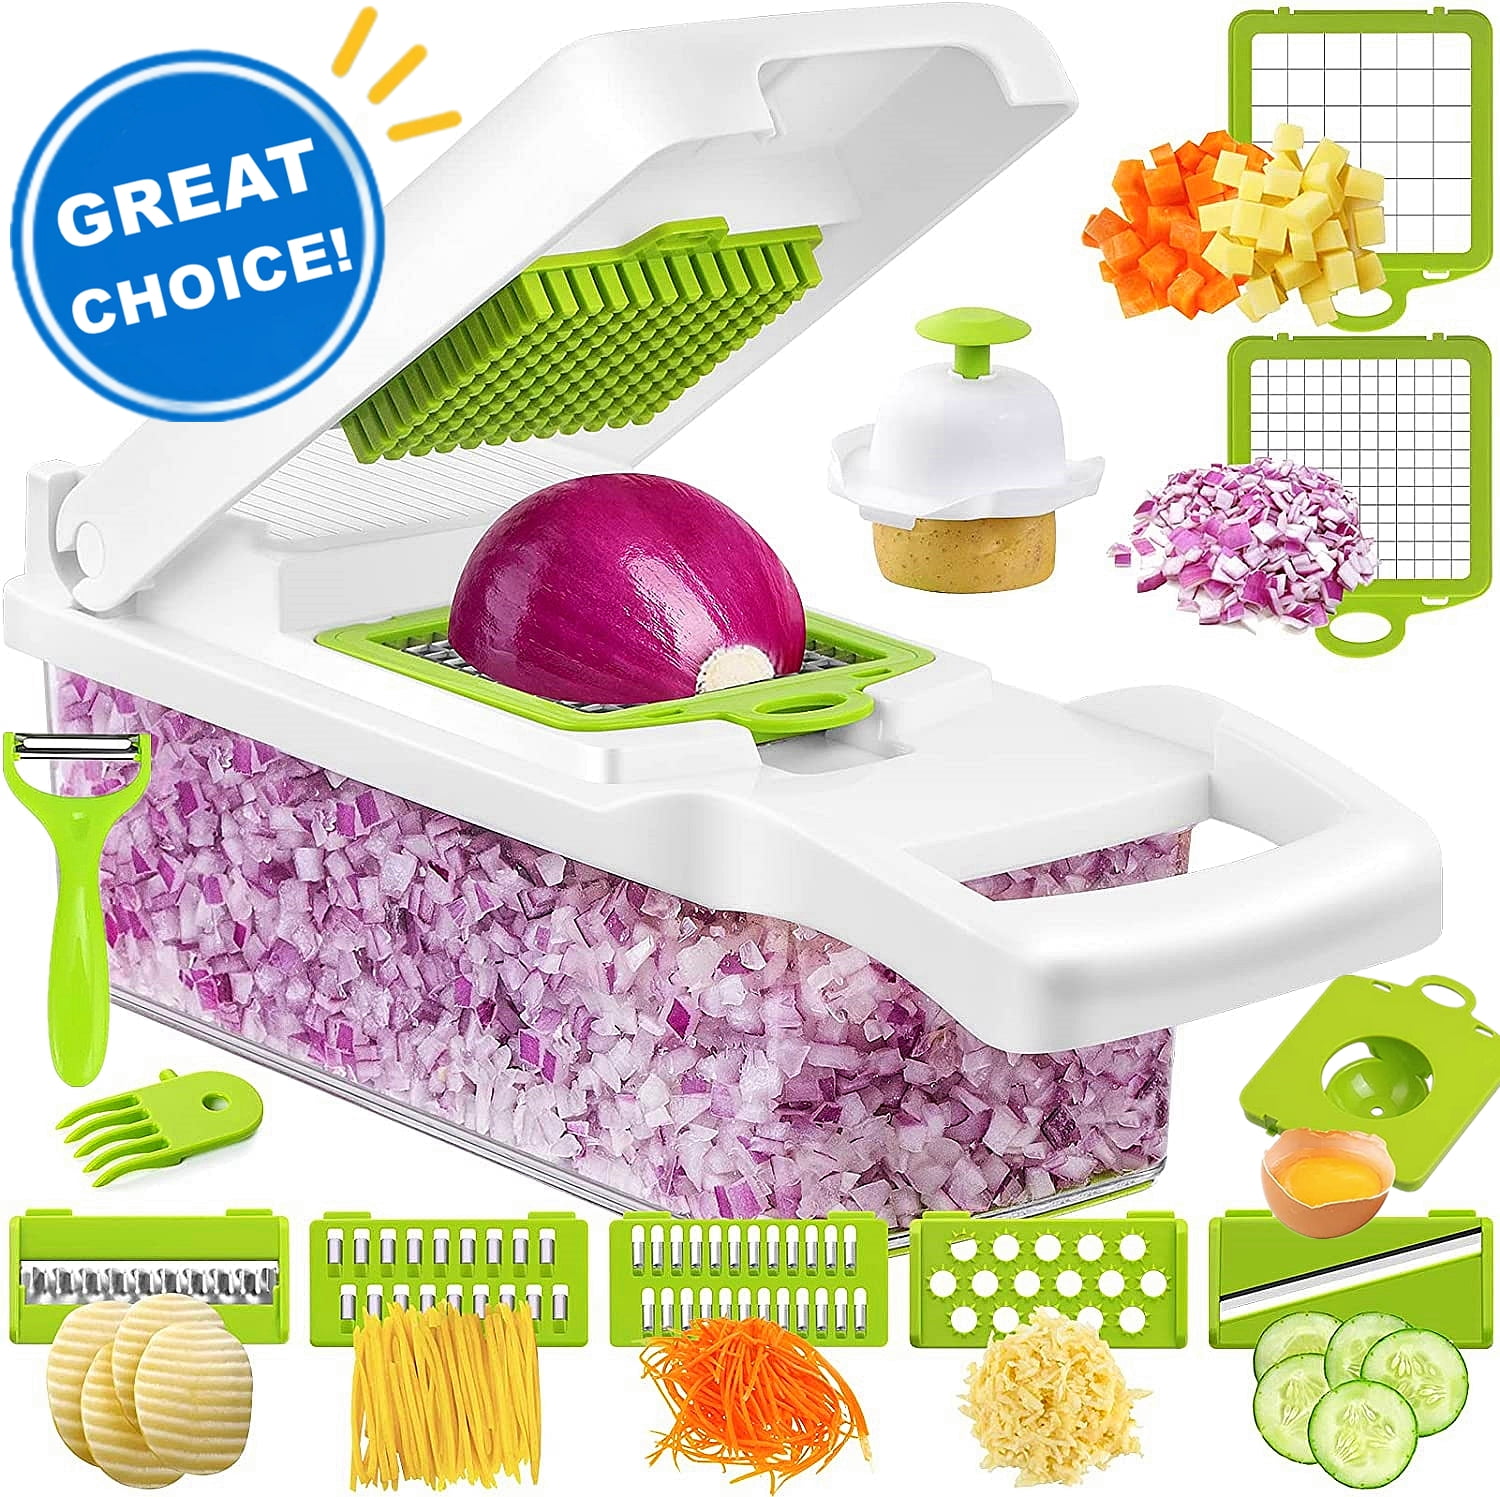 CofeLife 12 in 1 Pro Vegetable Chopper, Multi-functional Onion Chopper, Vegetable Cutter Stainless Steel Blades, Vegetable Slicer Container, Mandoline Slicer, Dicer, Cutter Ideal for Fruits/Salads